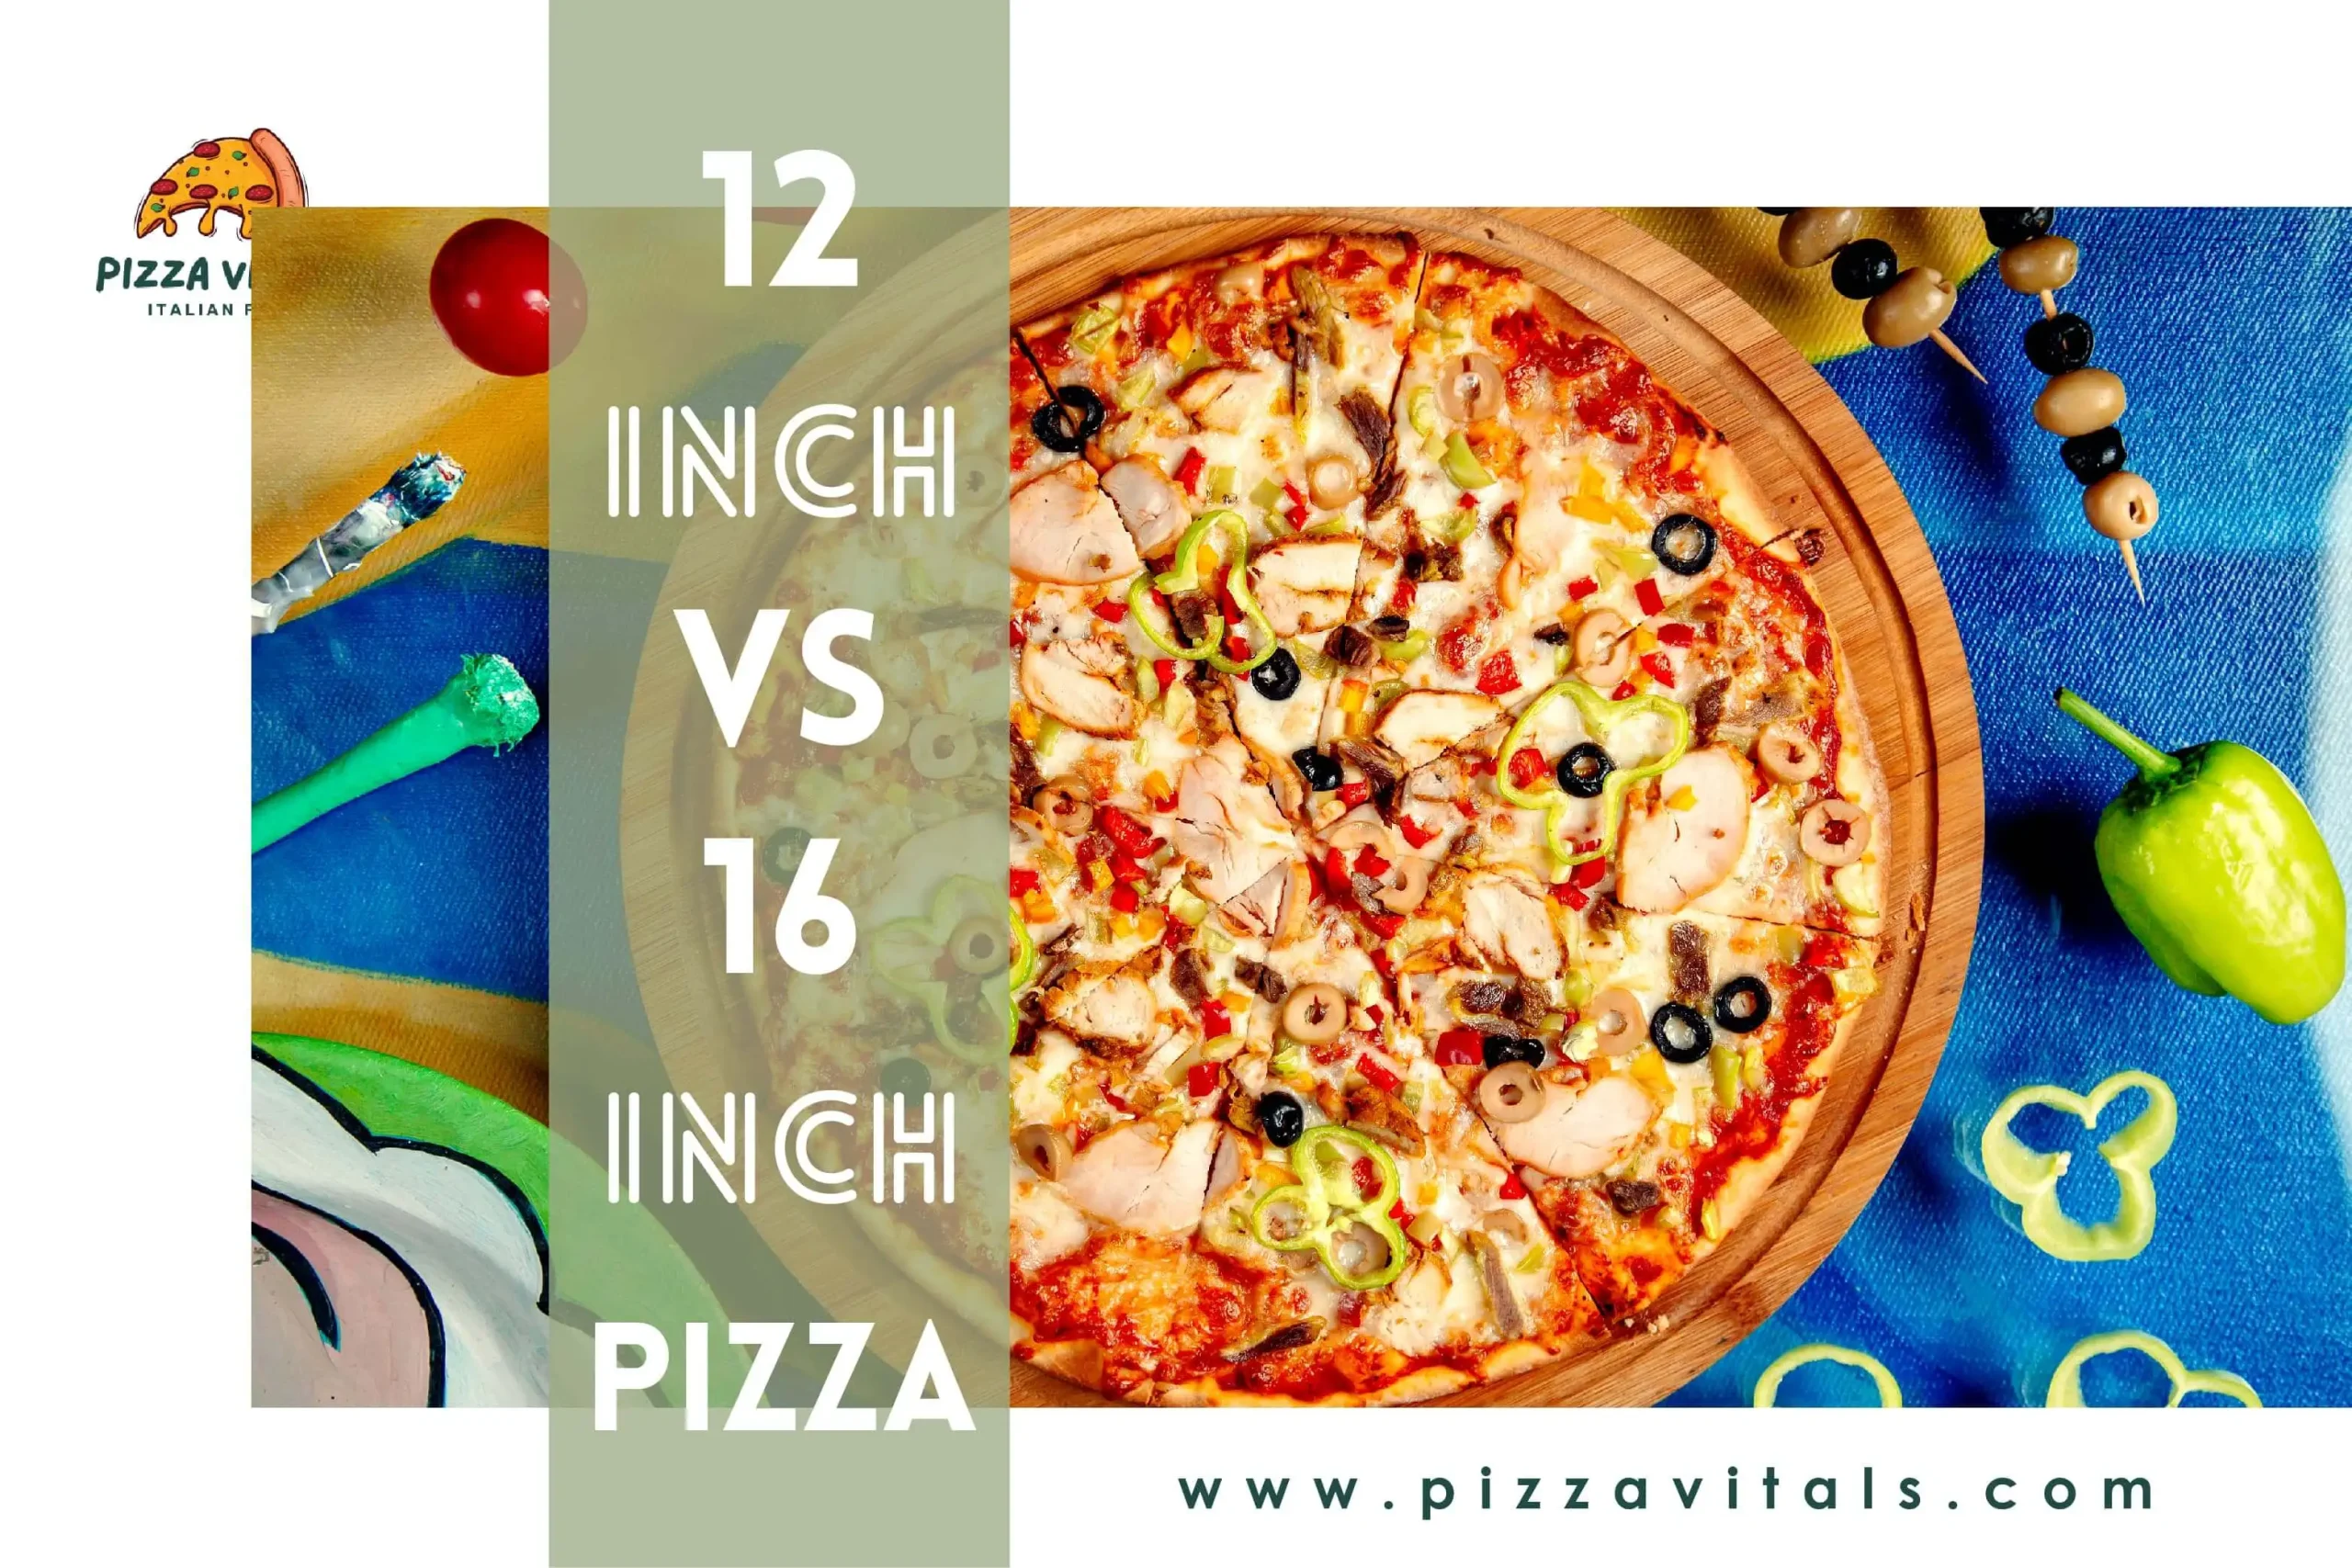 Which is Better: 12 Inch Vs 16 Inch Pizza